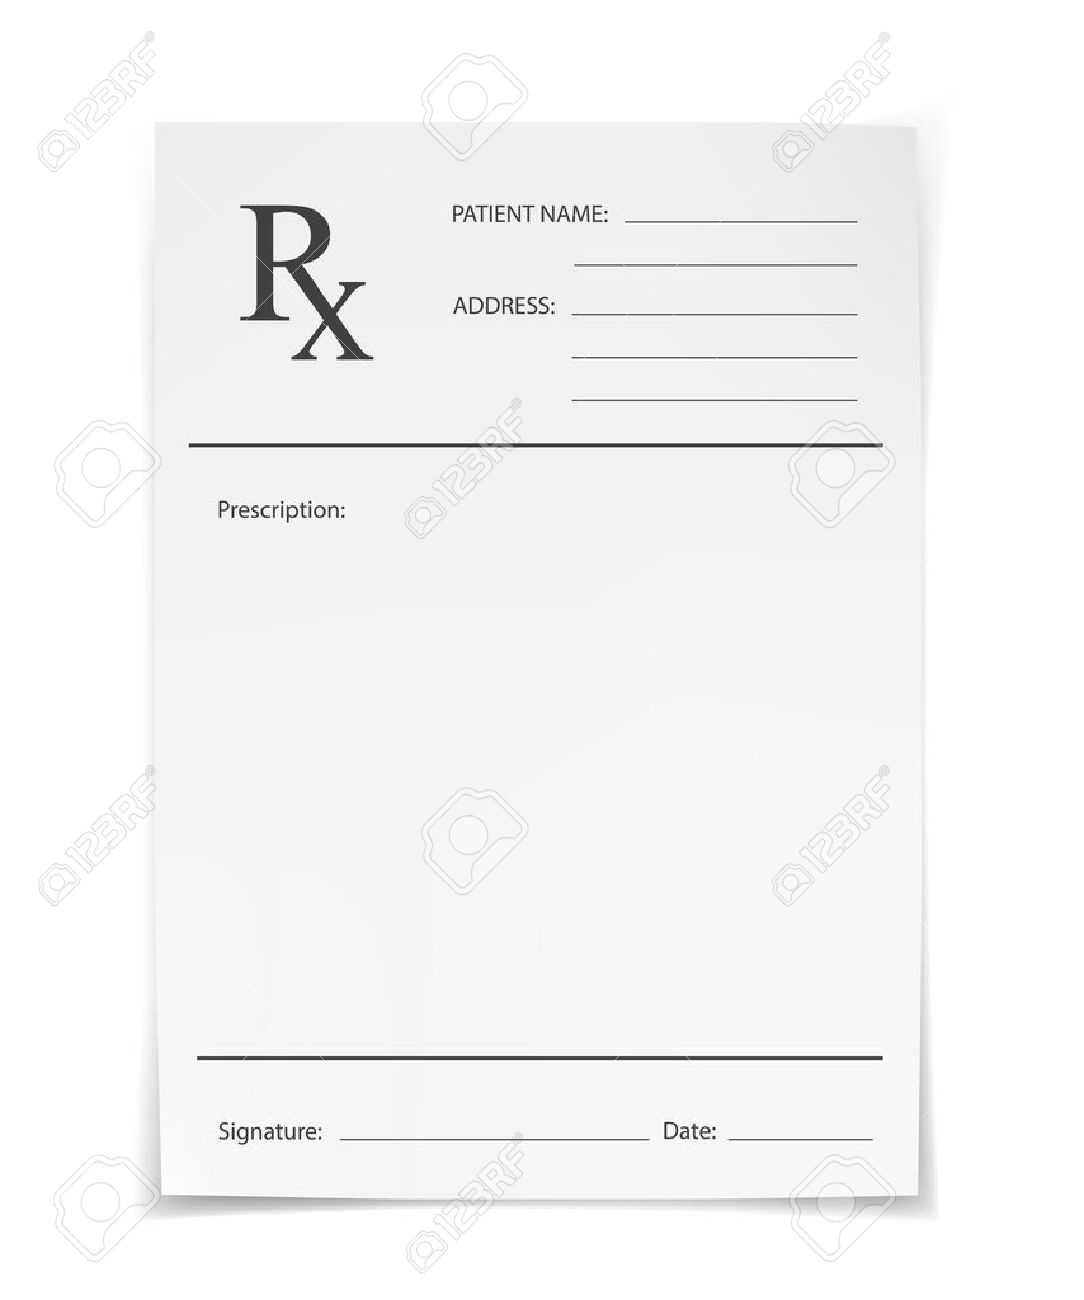 Blank Rx Prescription Form Isolated On White Background Pertaining To Blank Prescription Form Template